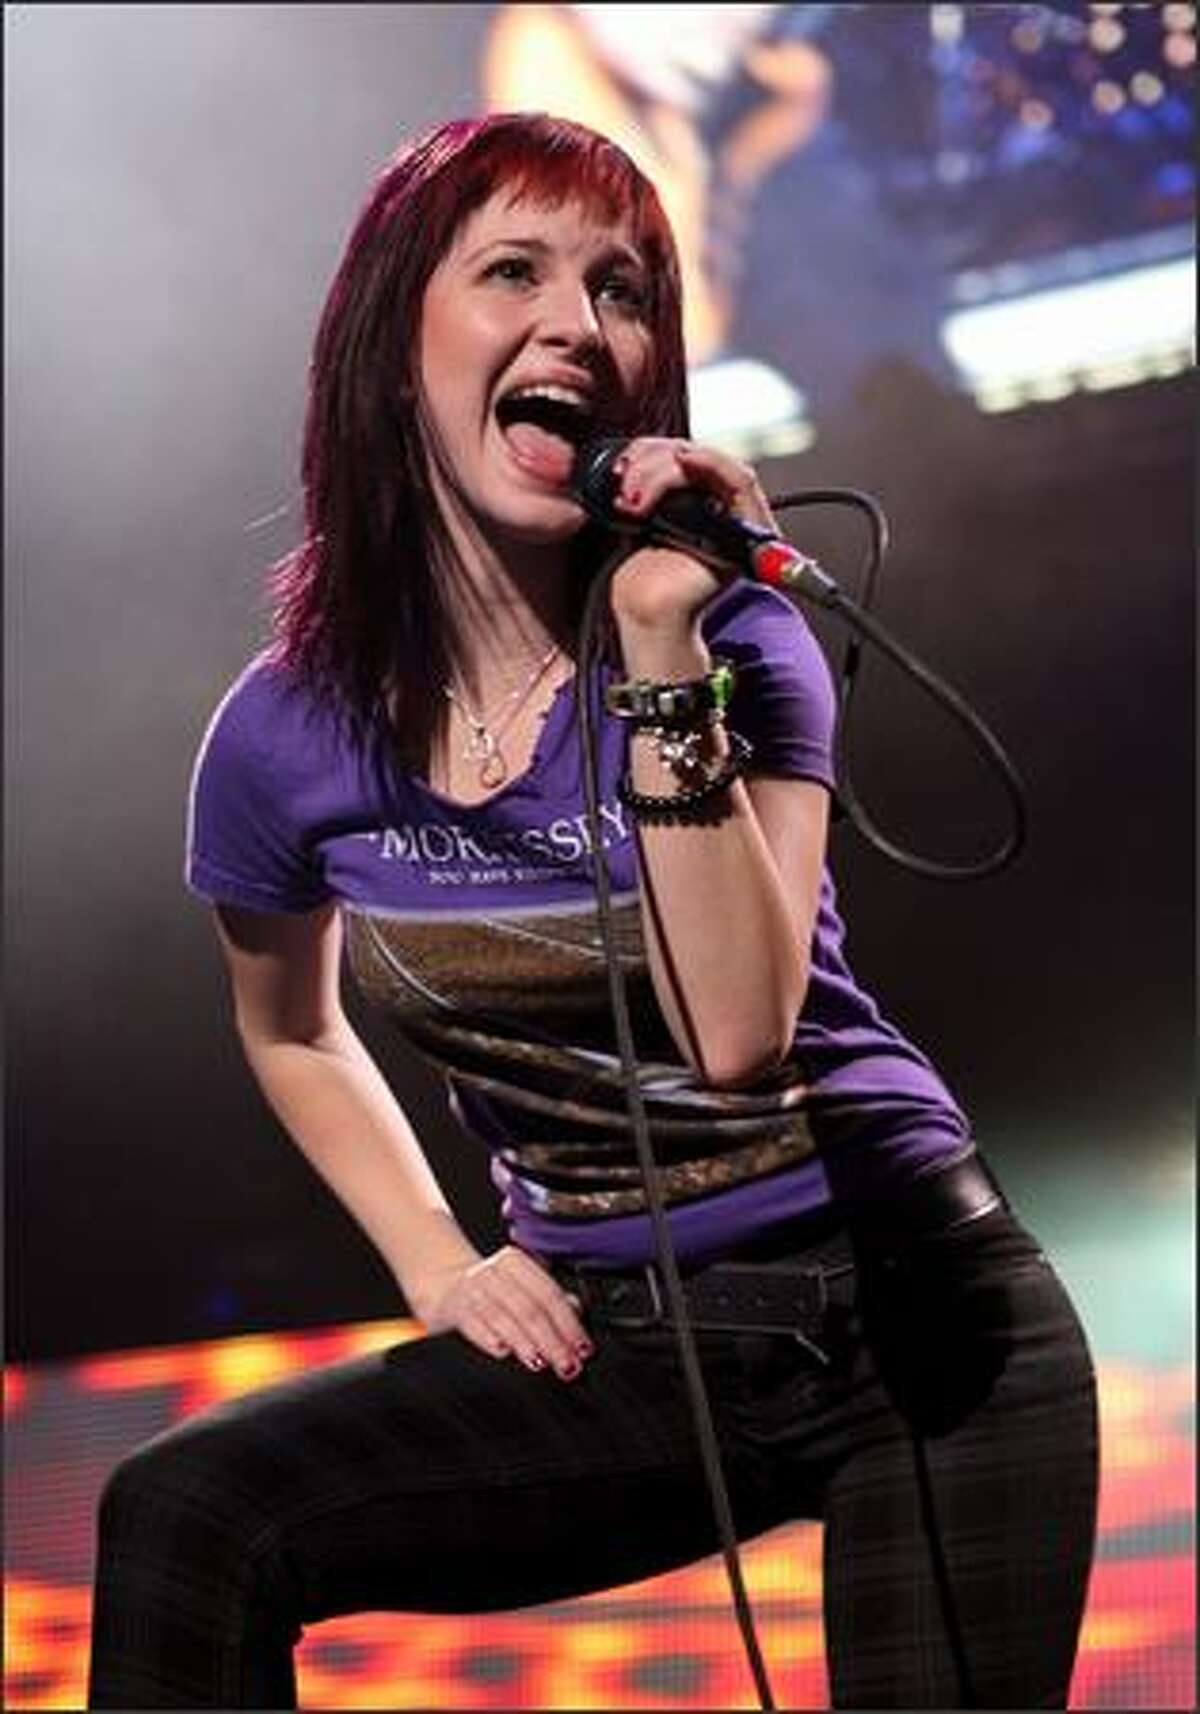 Singer Hayley Williams of Paramore performs.